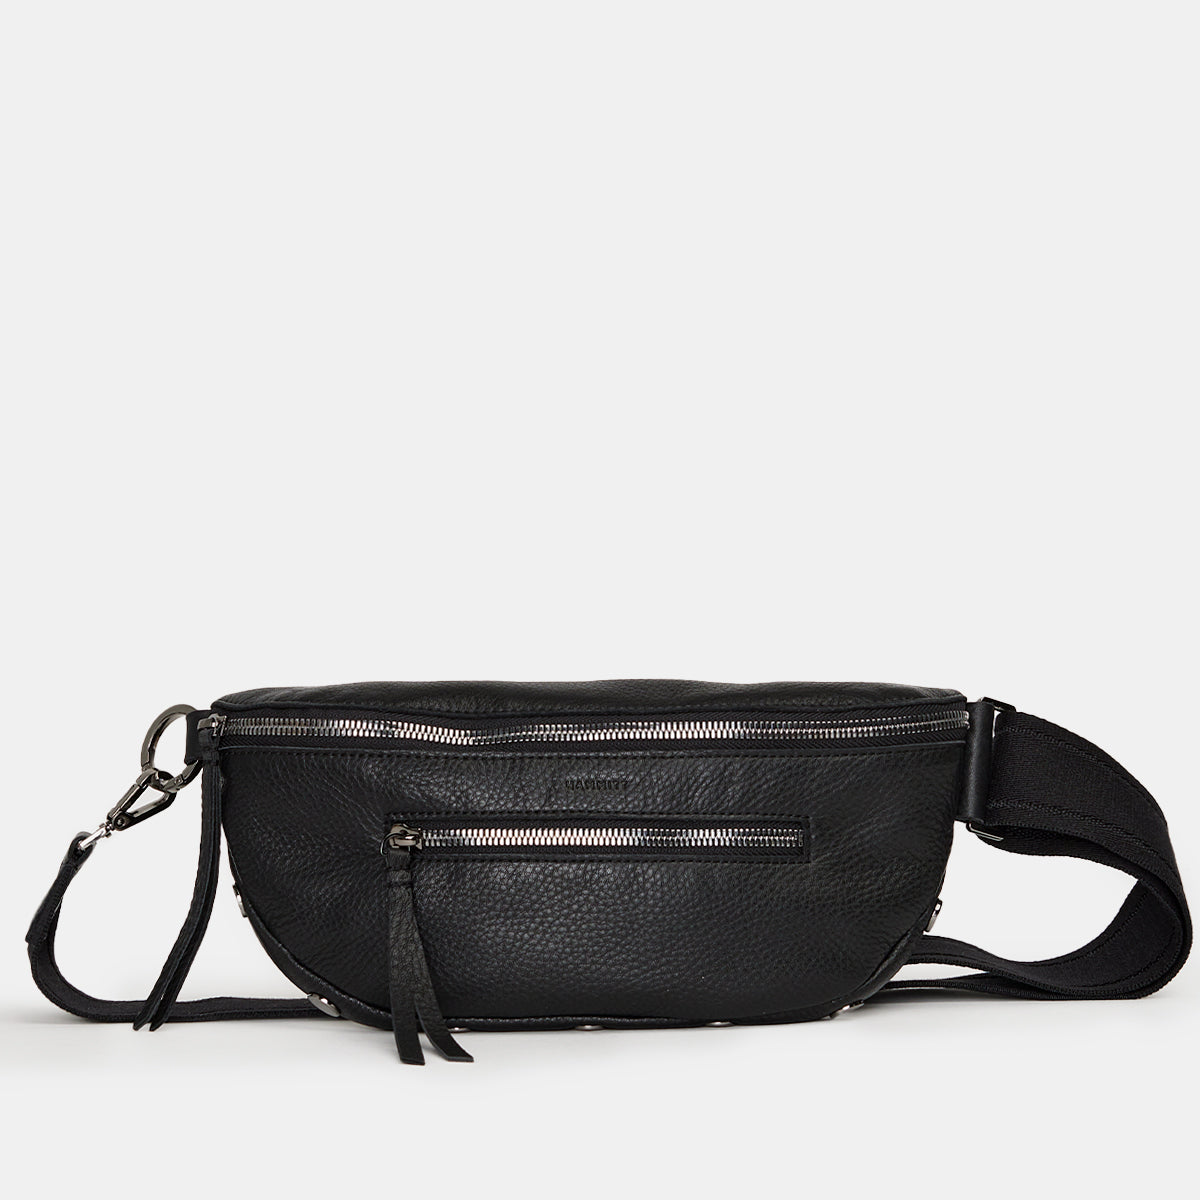 Charles-Crossbody-Black-Front-View